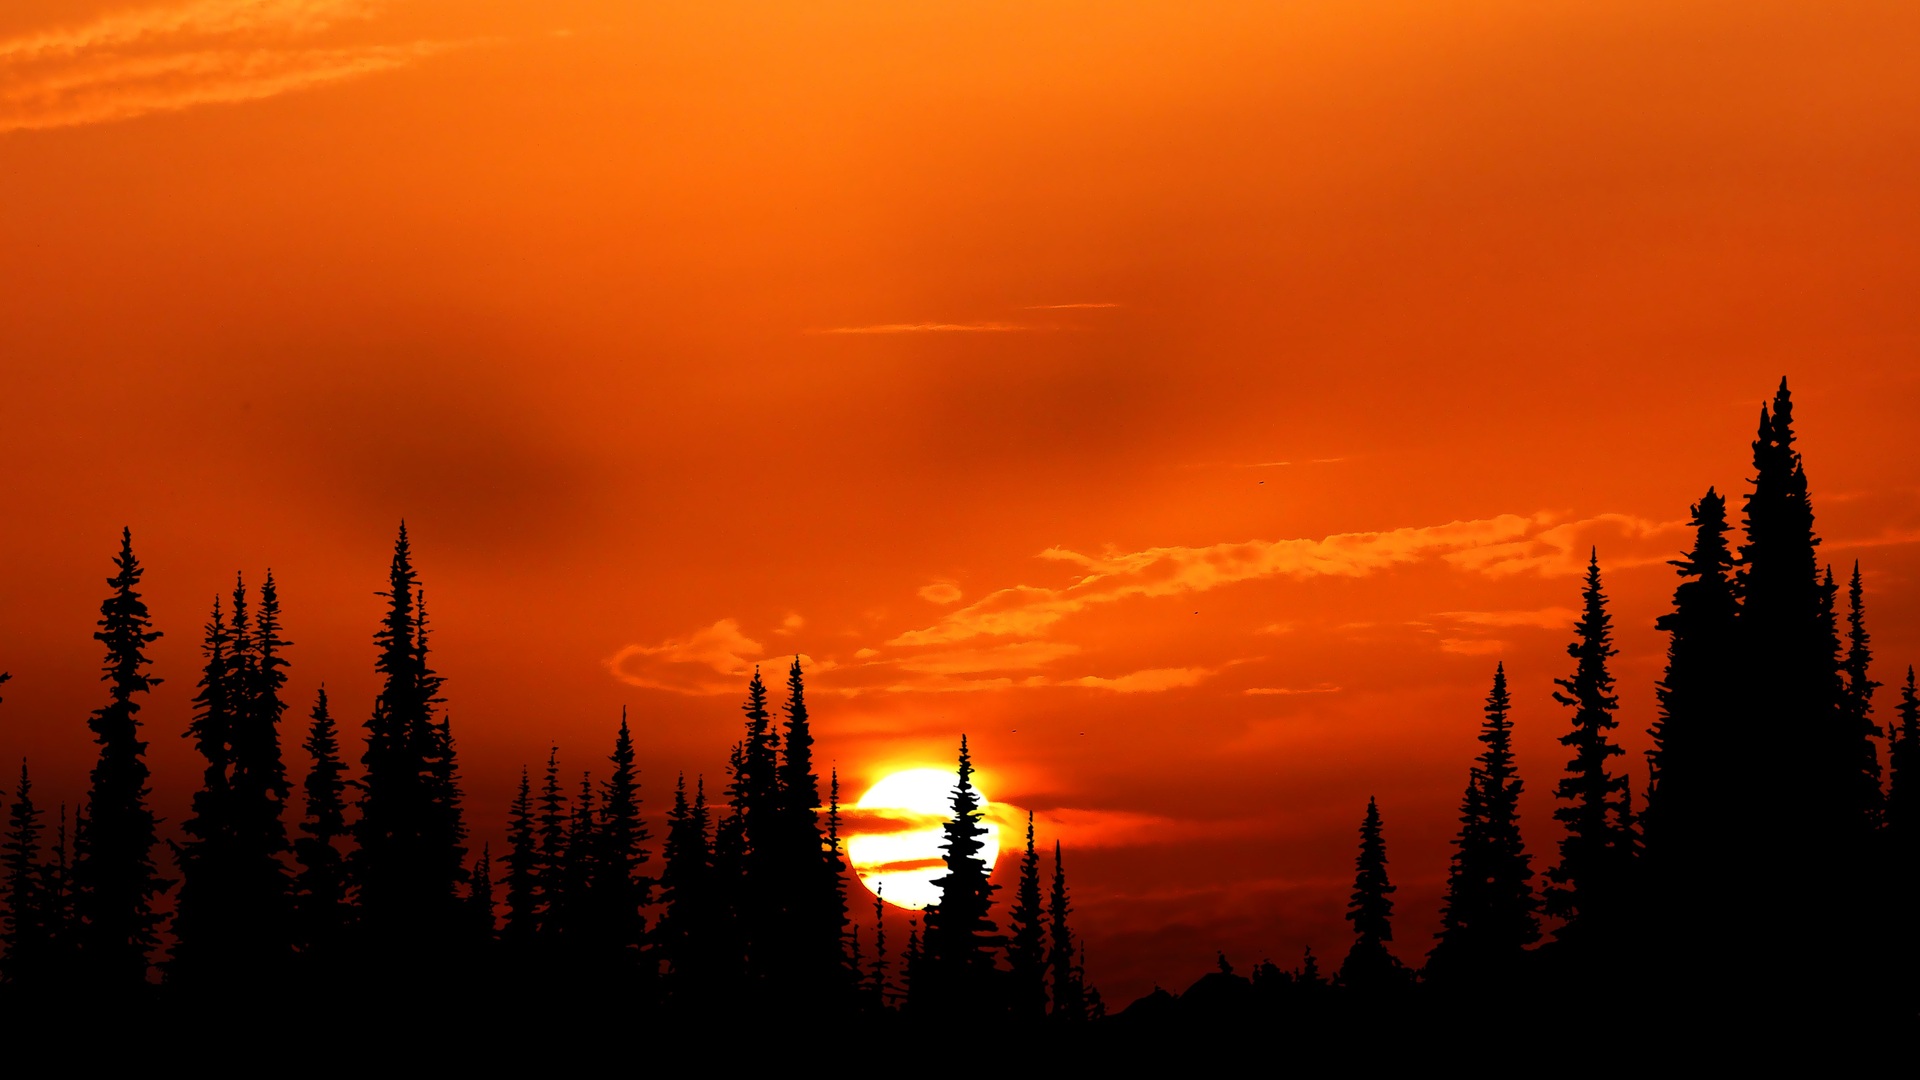 Cloudy Orange Sunset In Forest Wallpapers